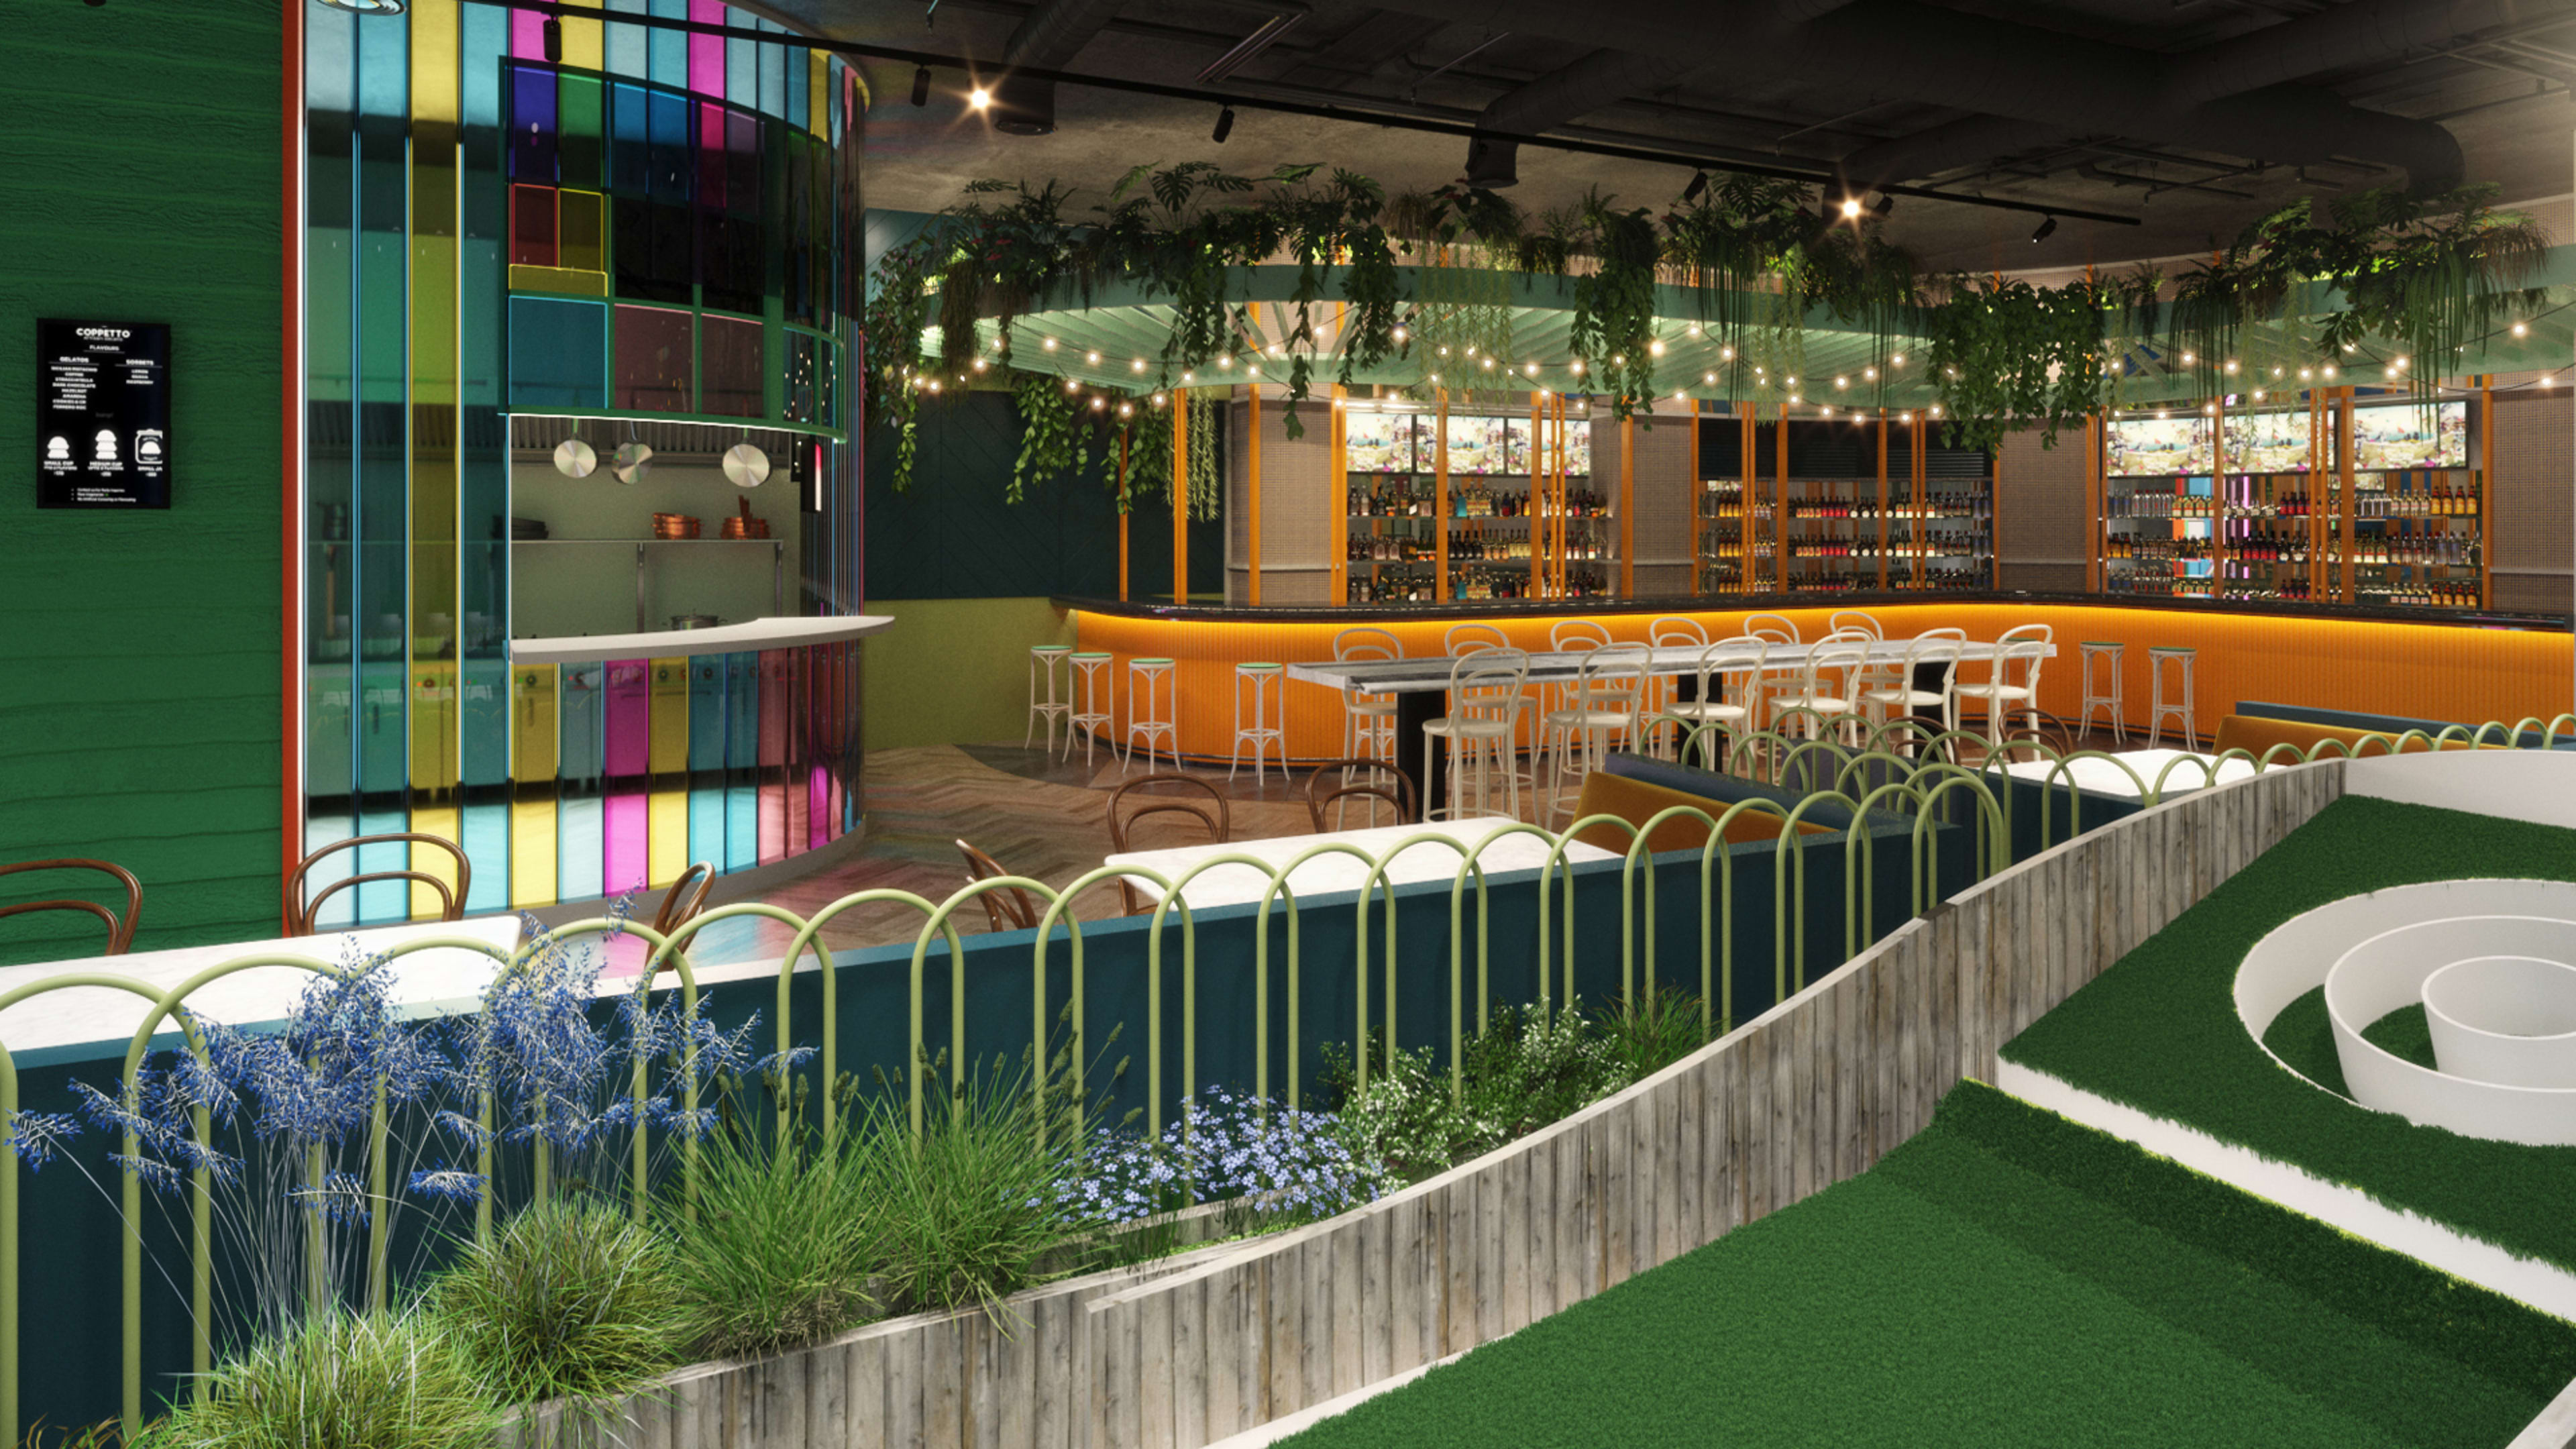 First look: Swingers crazy golf comes to America just in time for the new Roaring ’20s